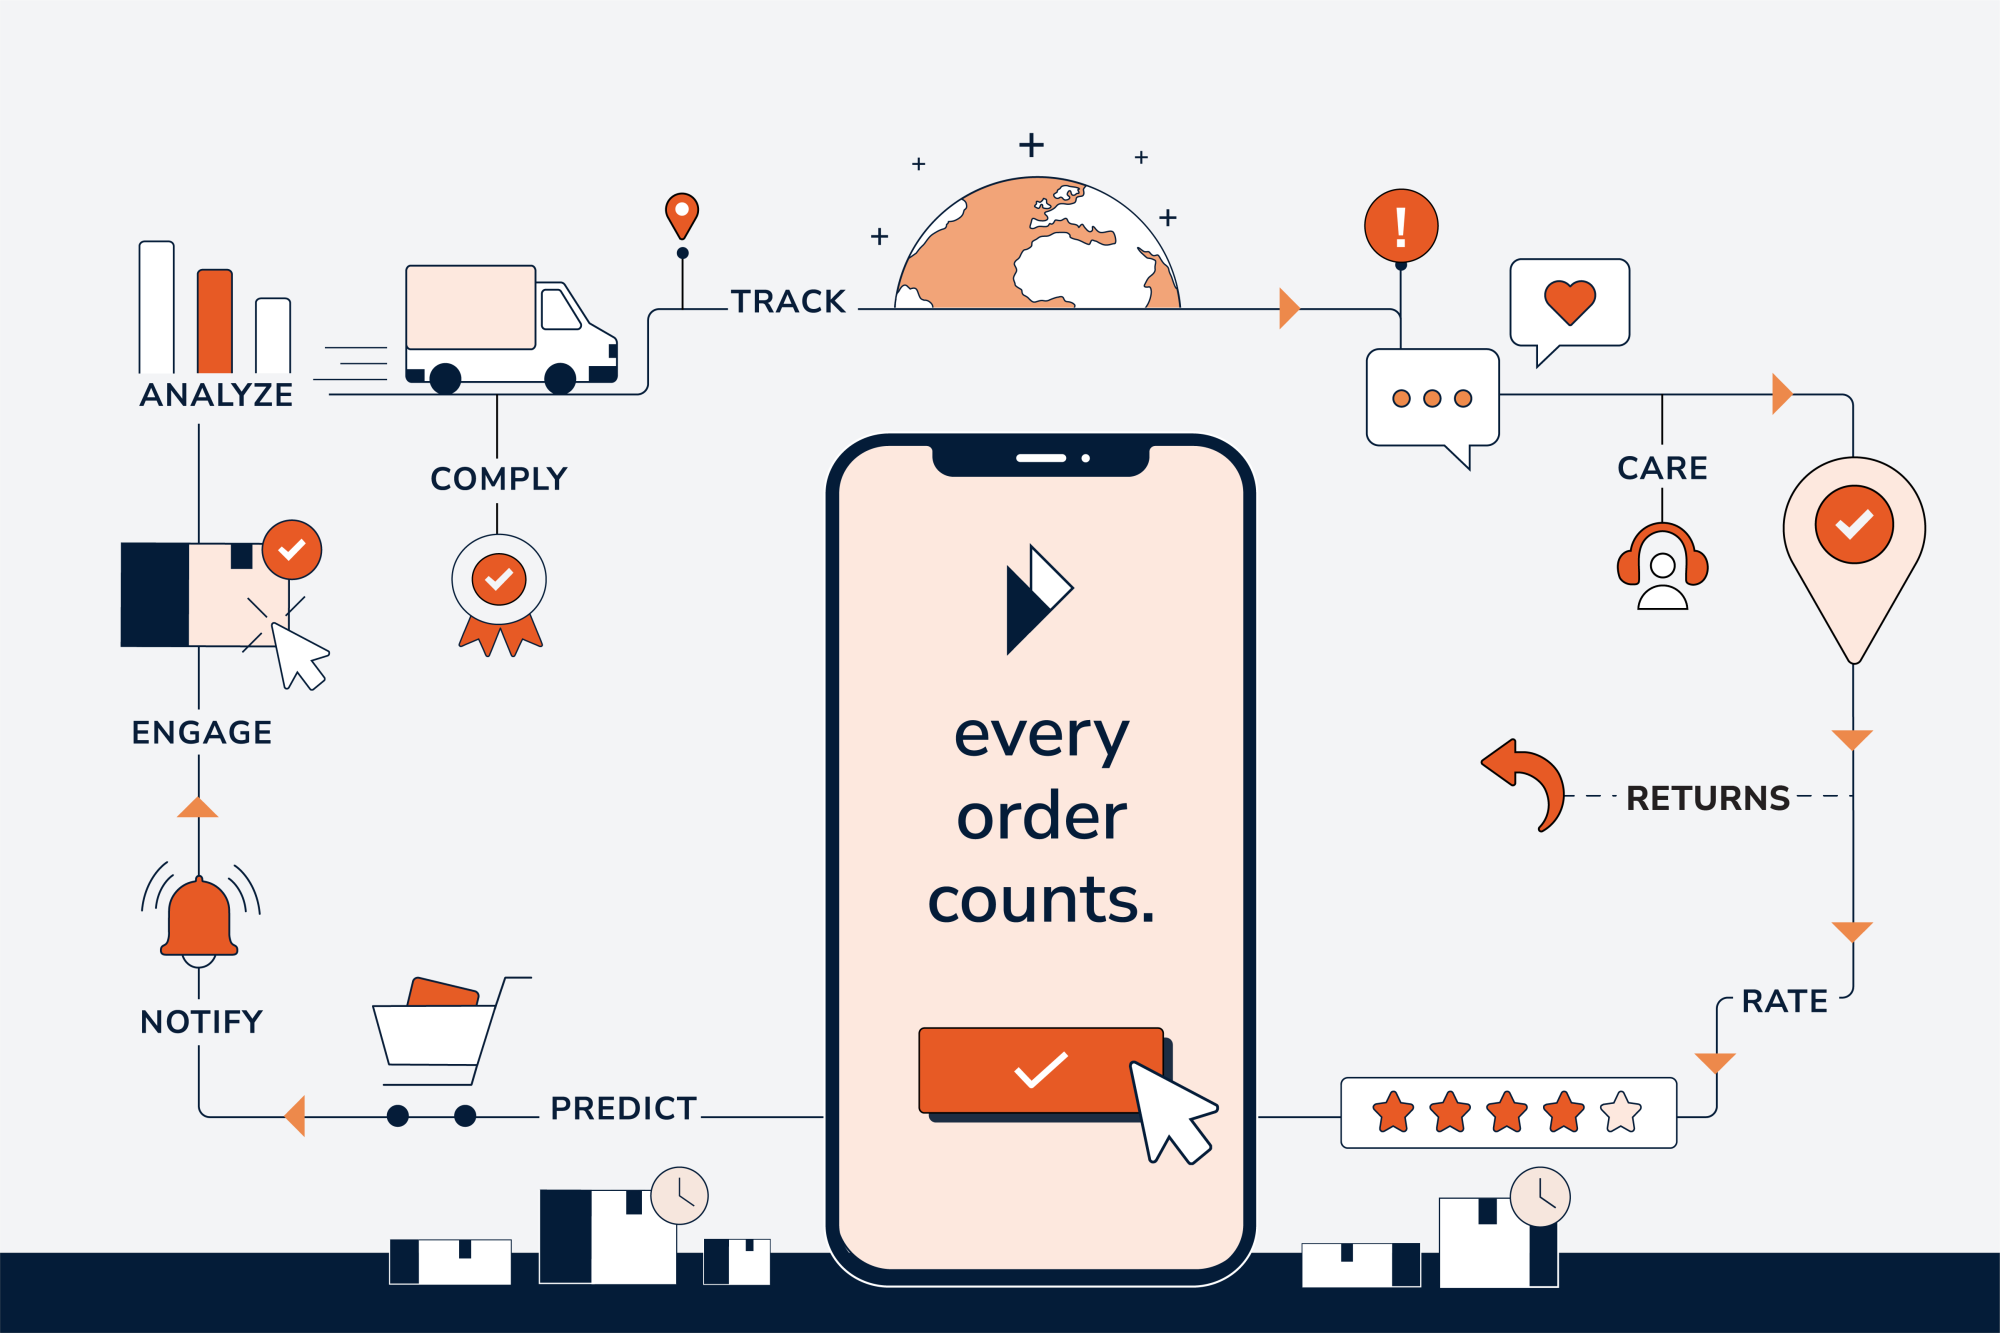 Parcel Perform - every order counts.